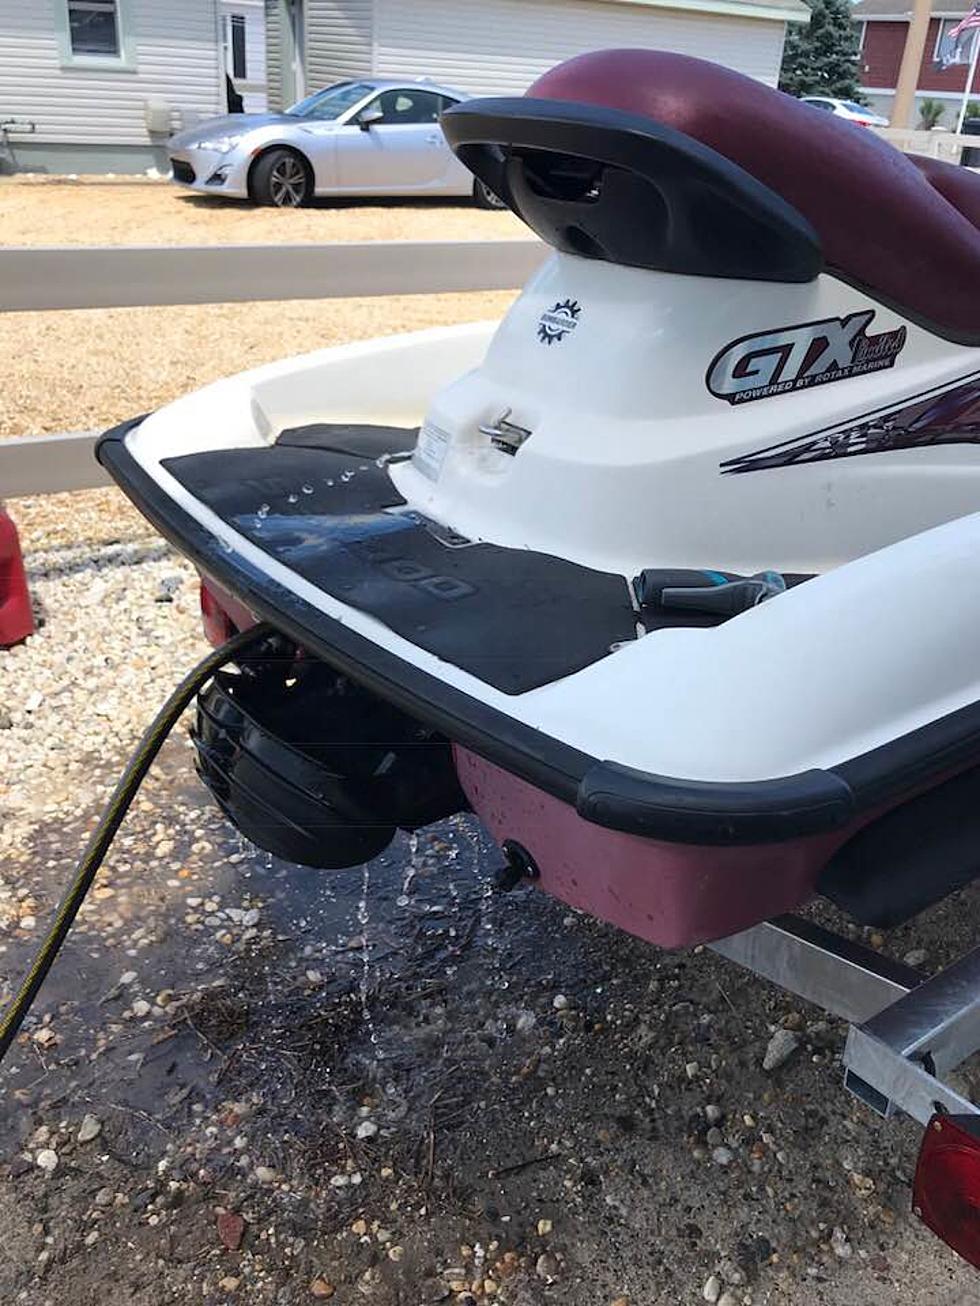 NJ Resident Commutes To Work On A Jet Ski – Would You? [POLL]